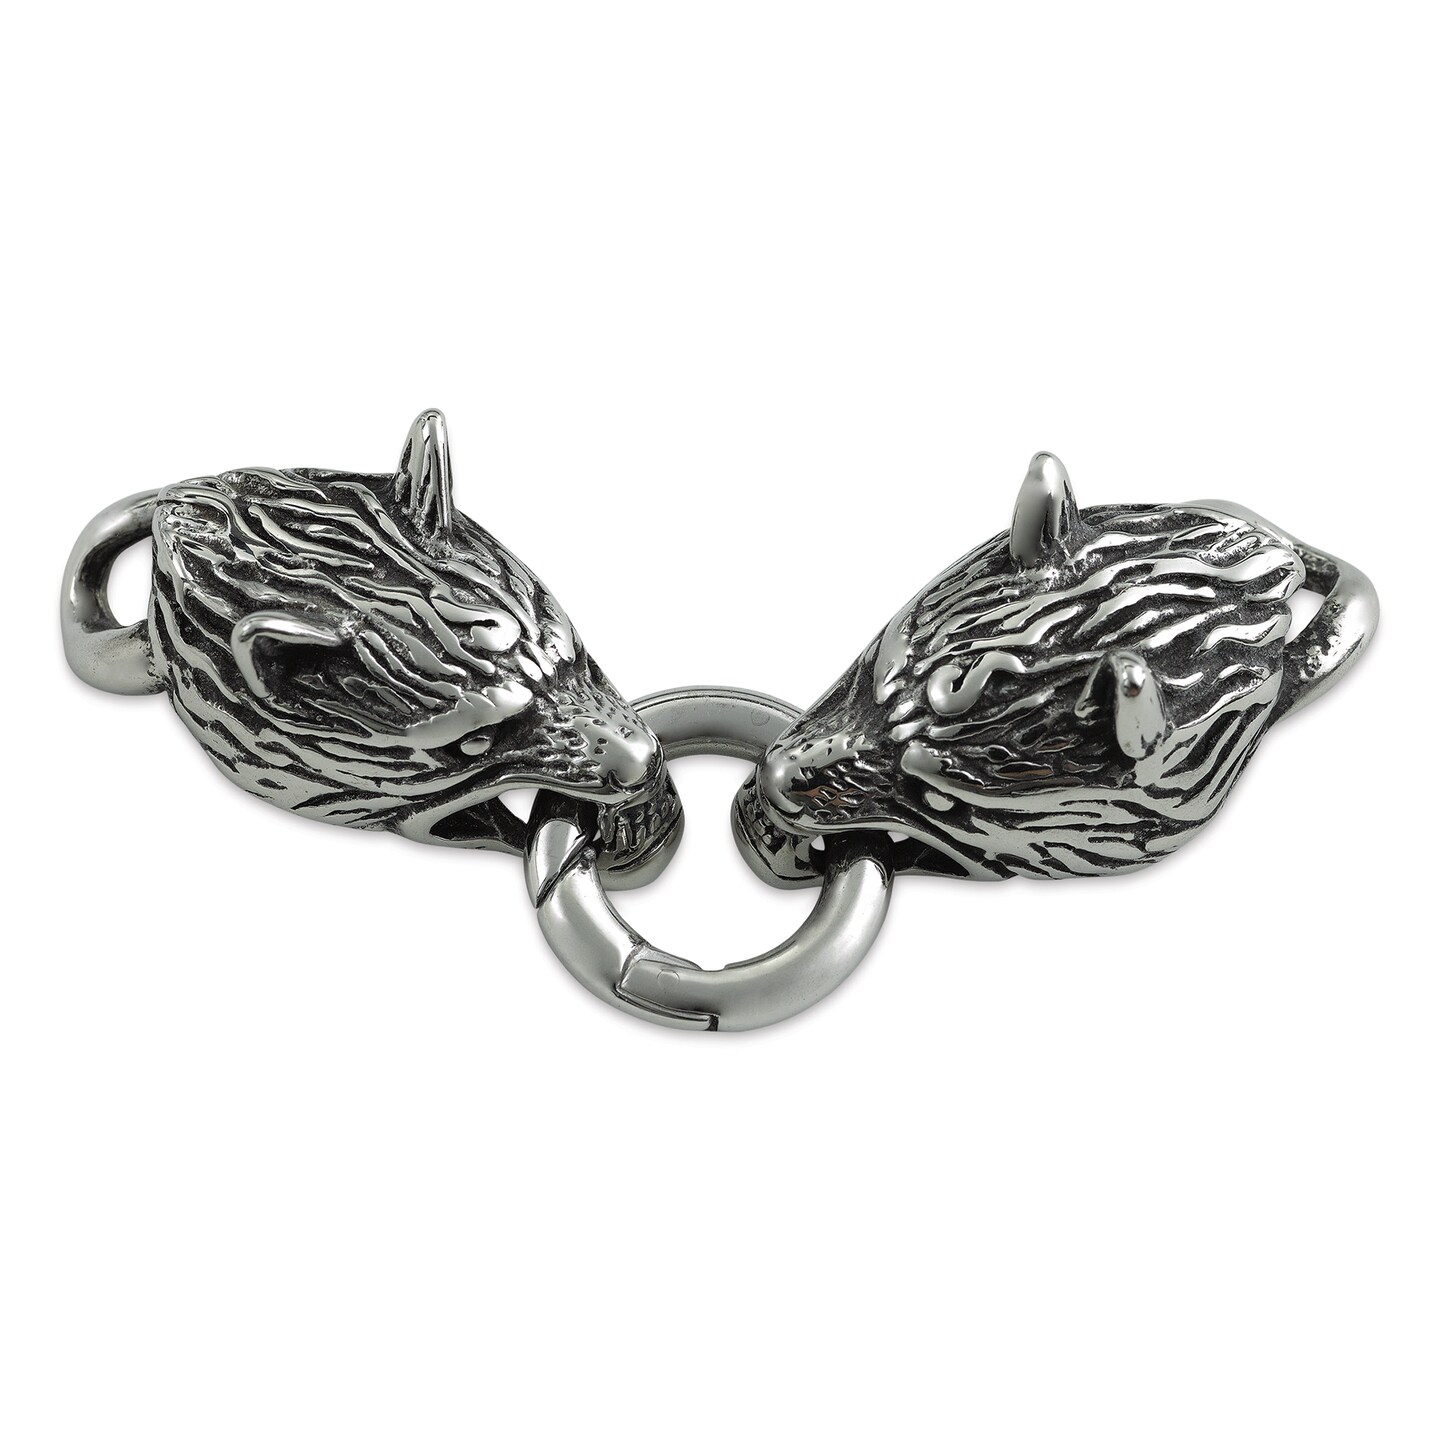 John Bead Stainless Steel Antique Silver Clasp - Wolf Head, 34 x 18 mm